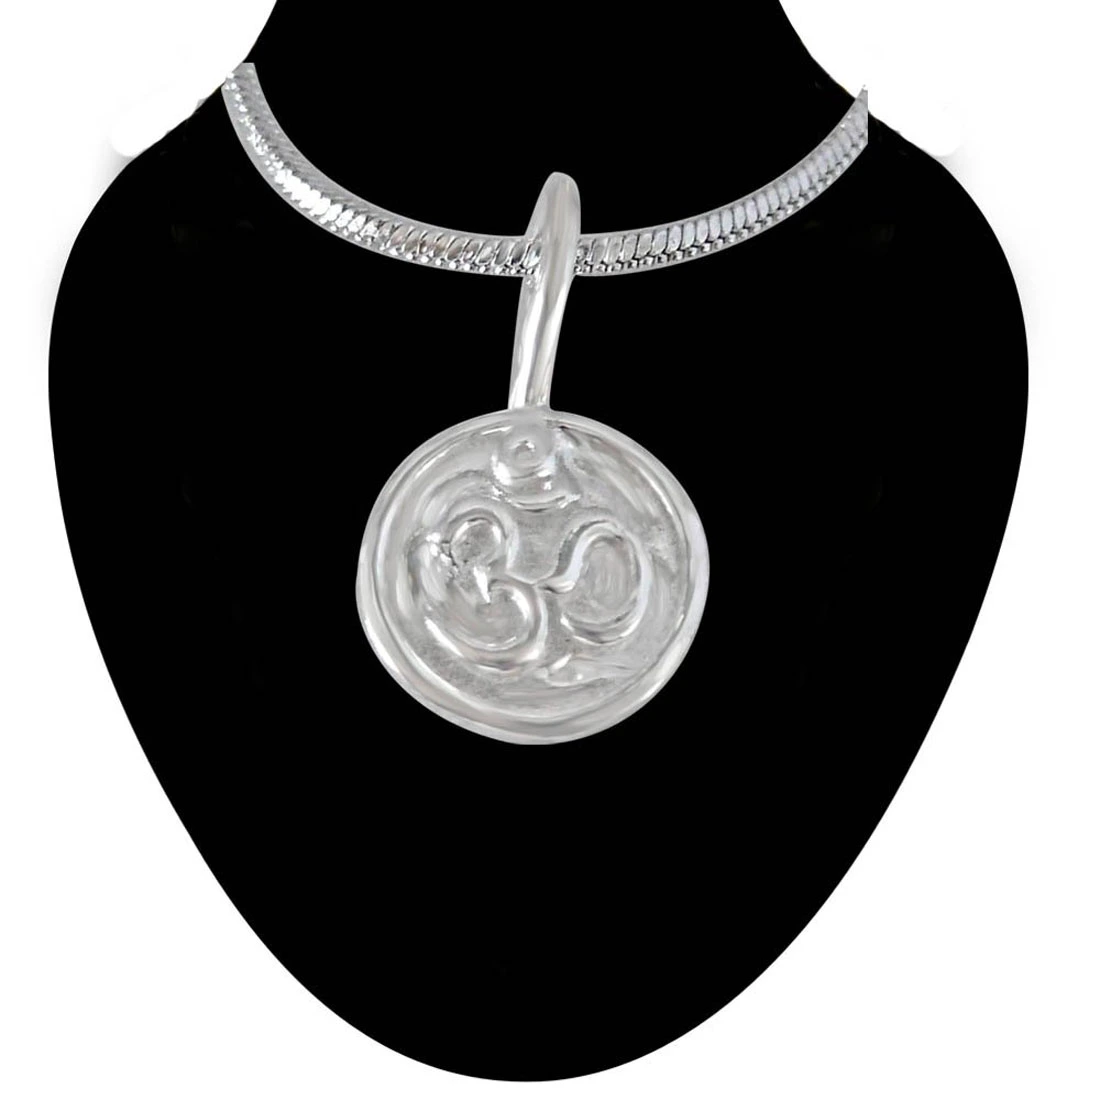 OM Pendant in Sterling Silver with Silver Finished Chain for Children (SDS200)